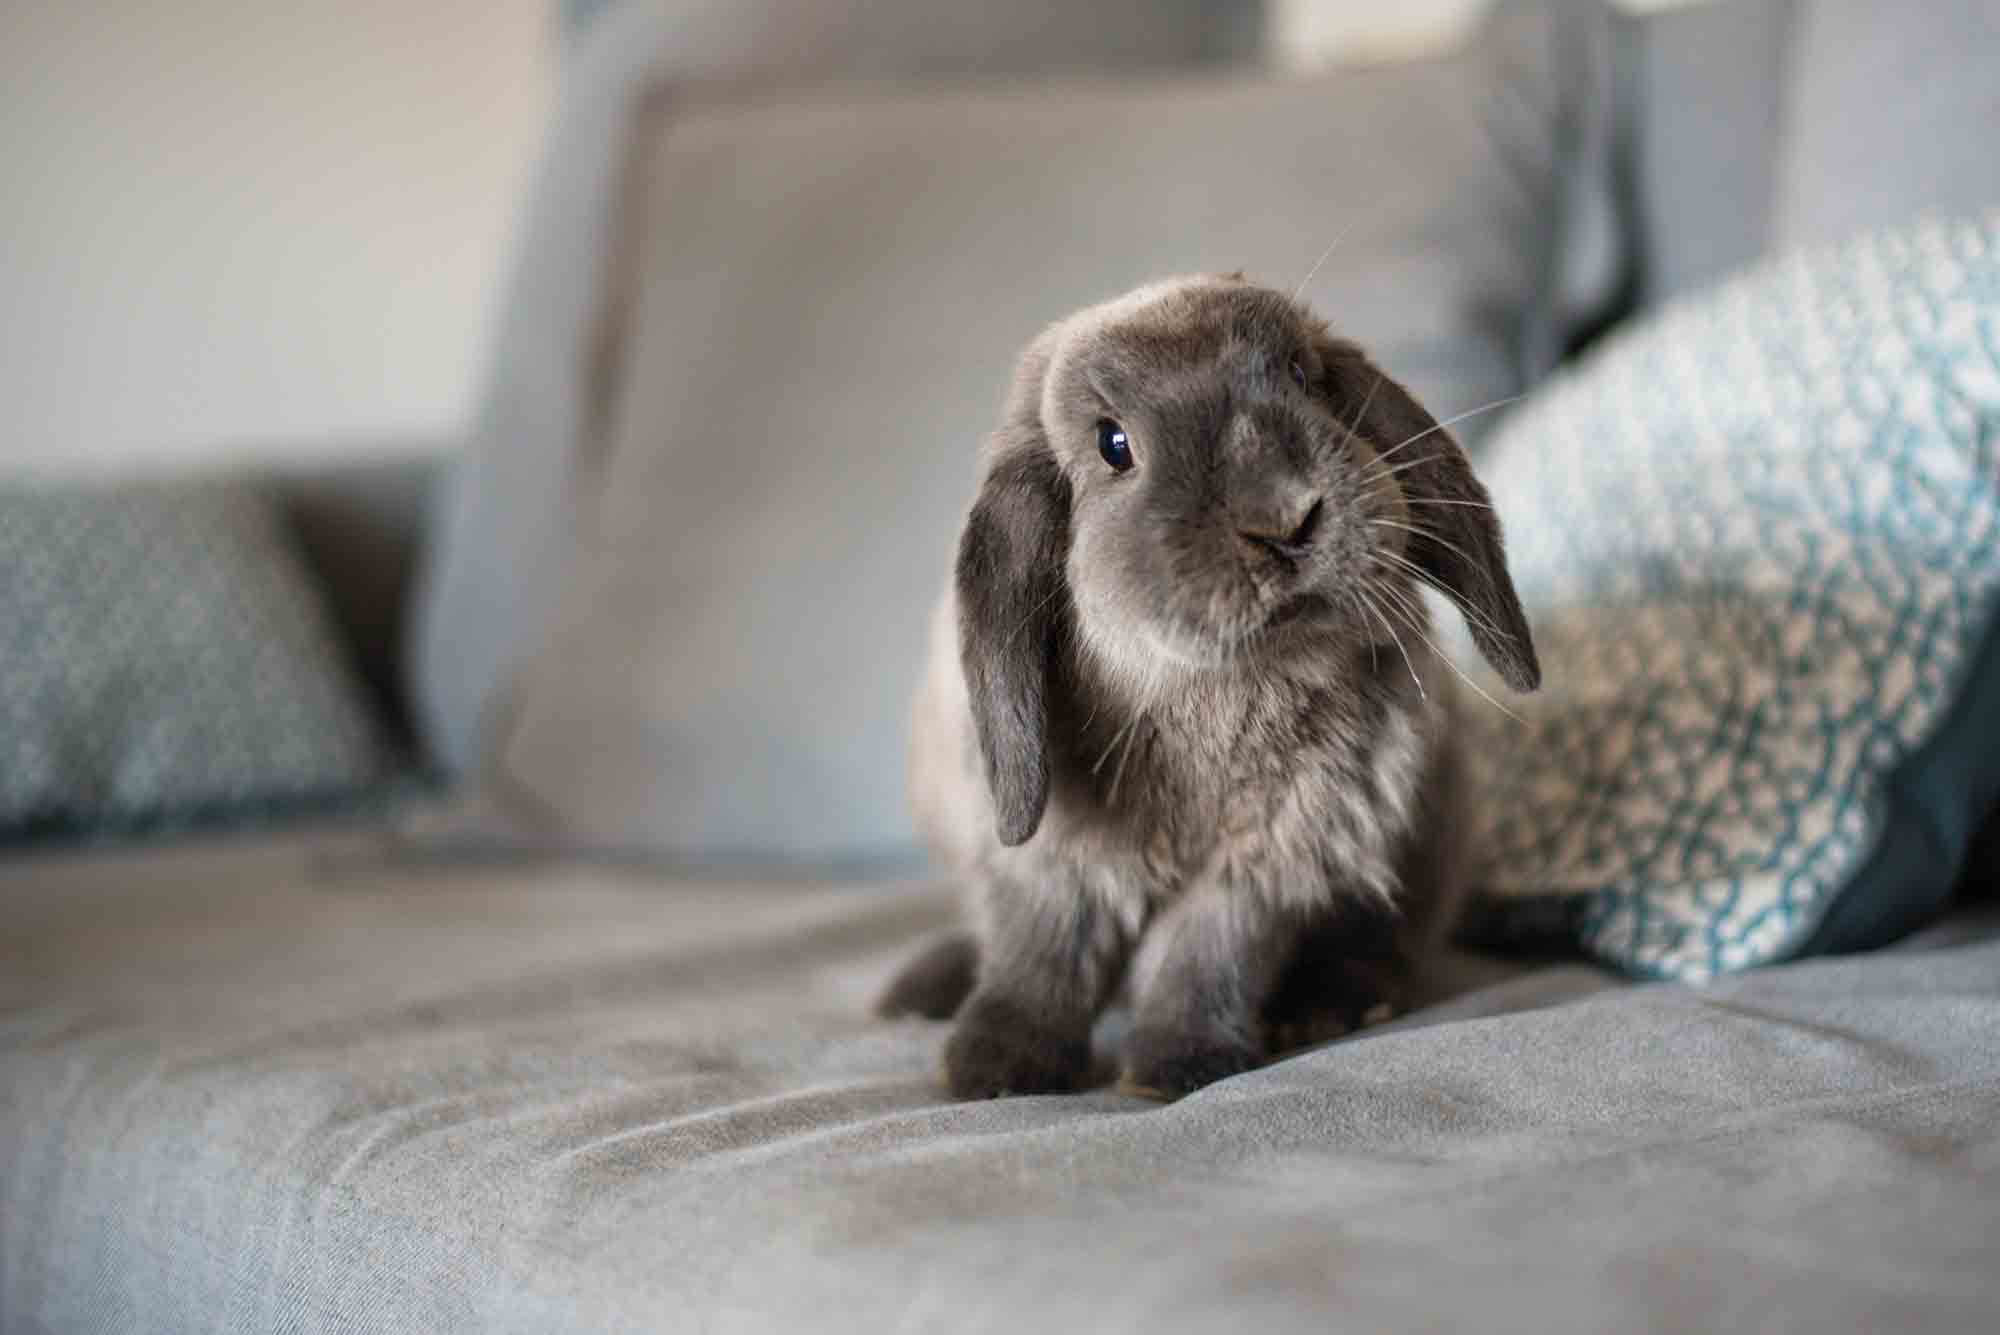 How Long For Rabbits To Have Babies?